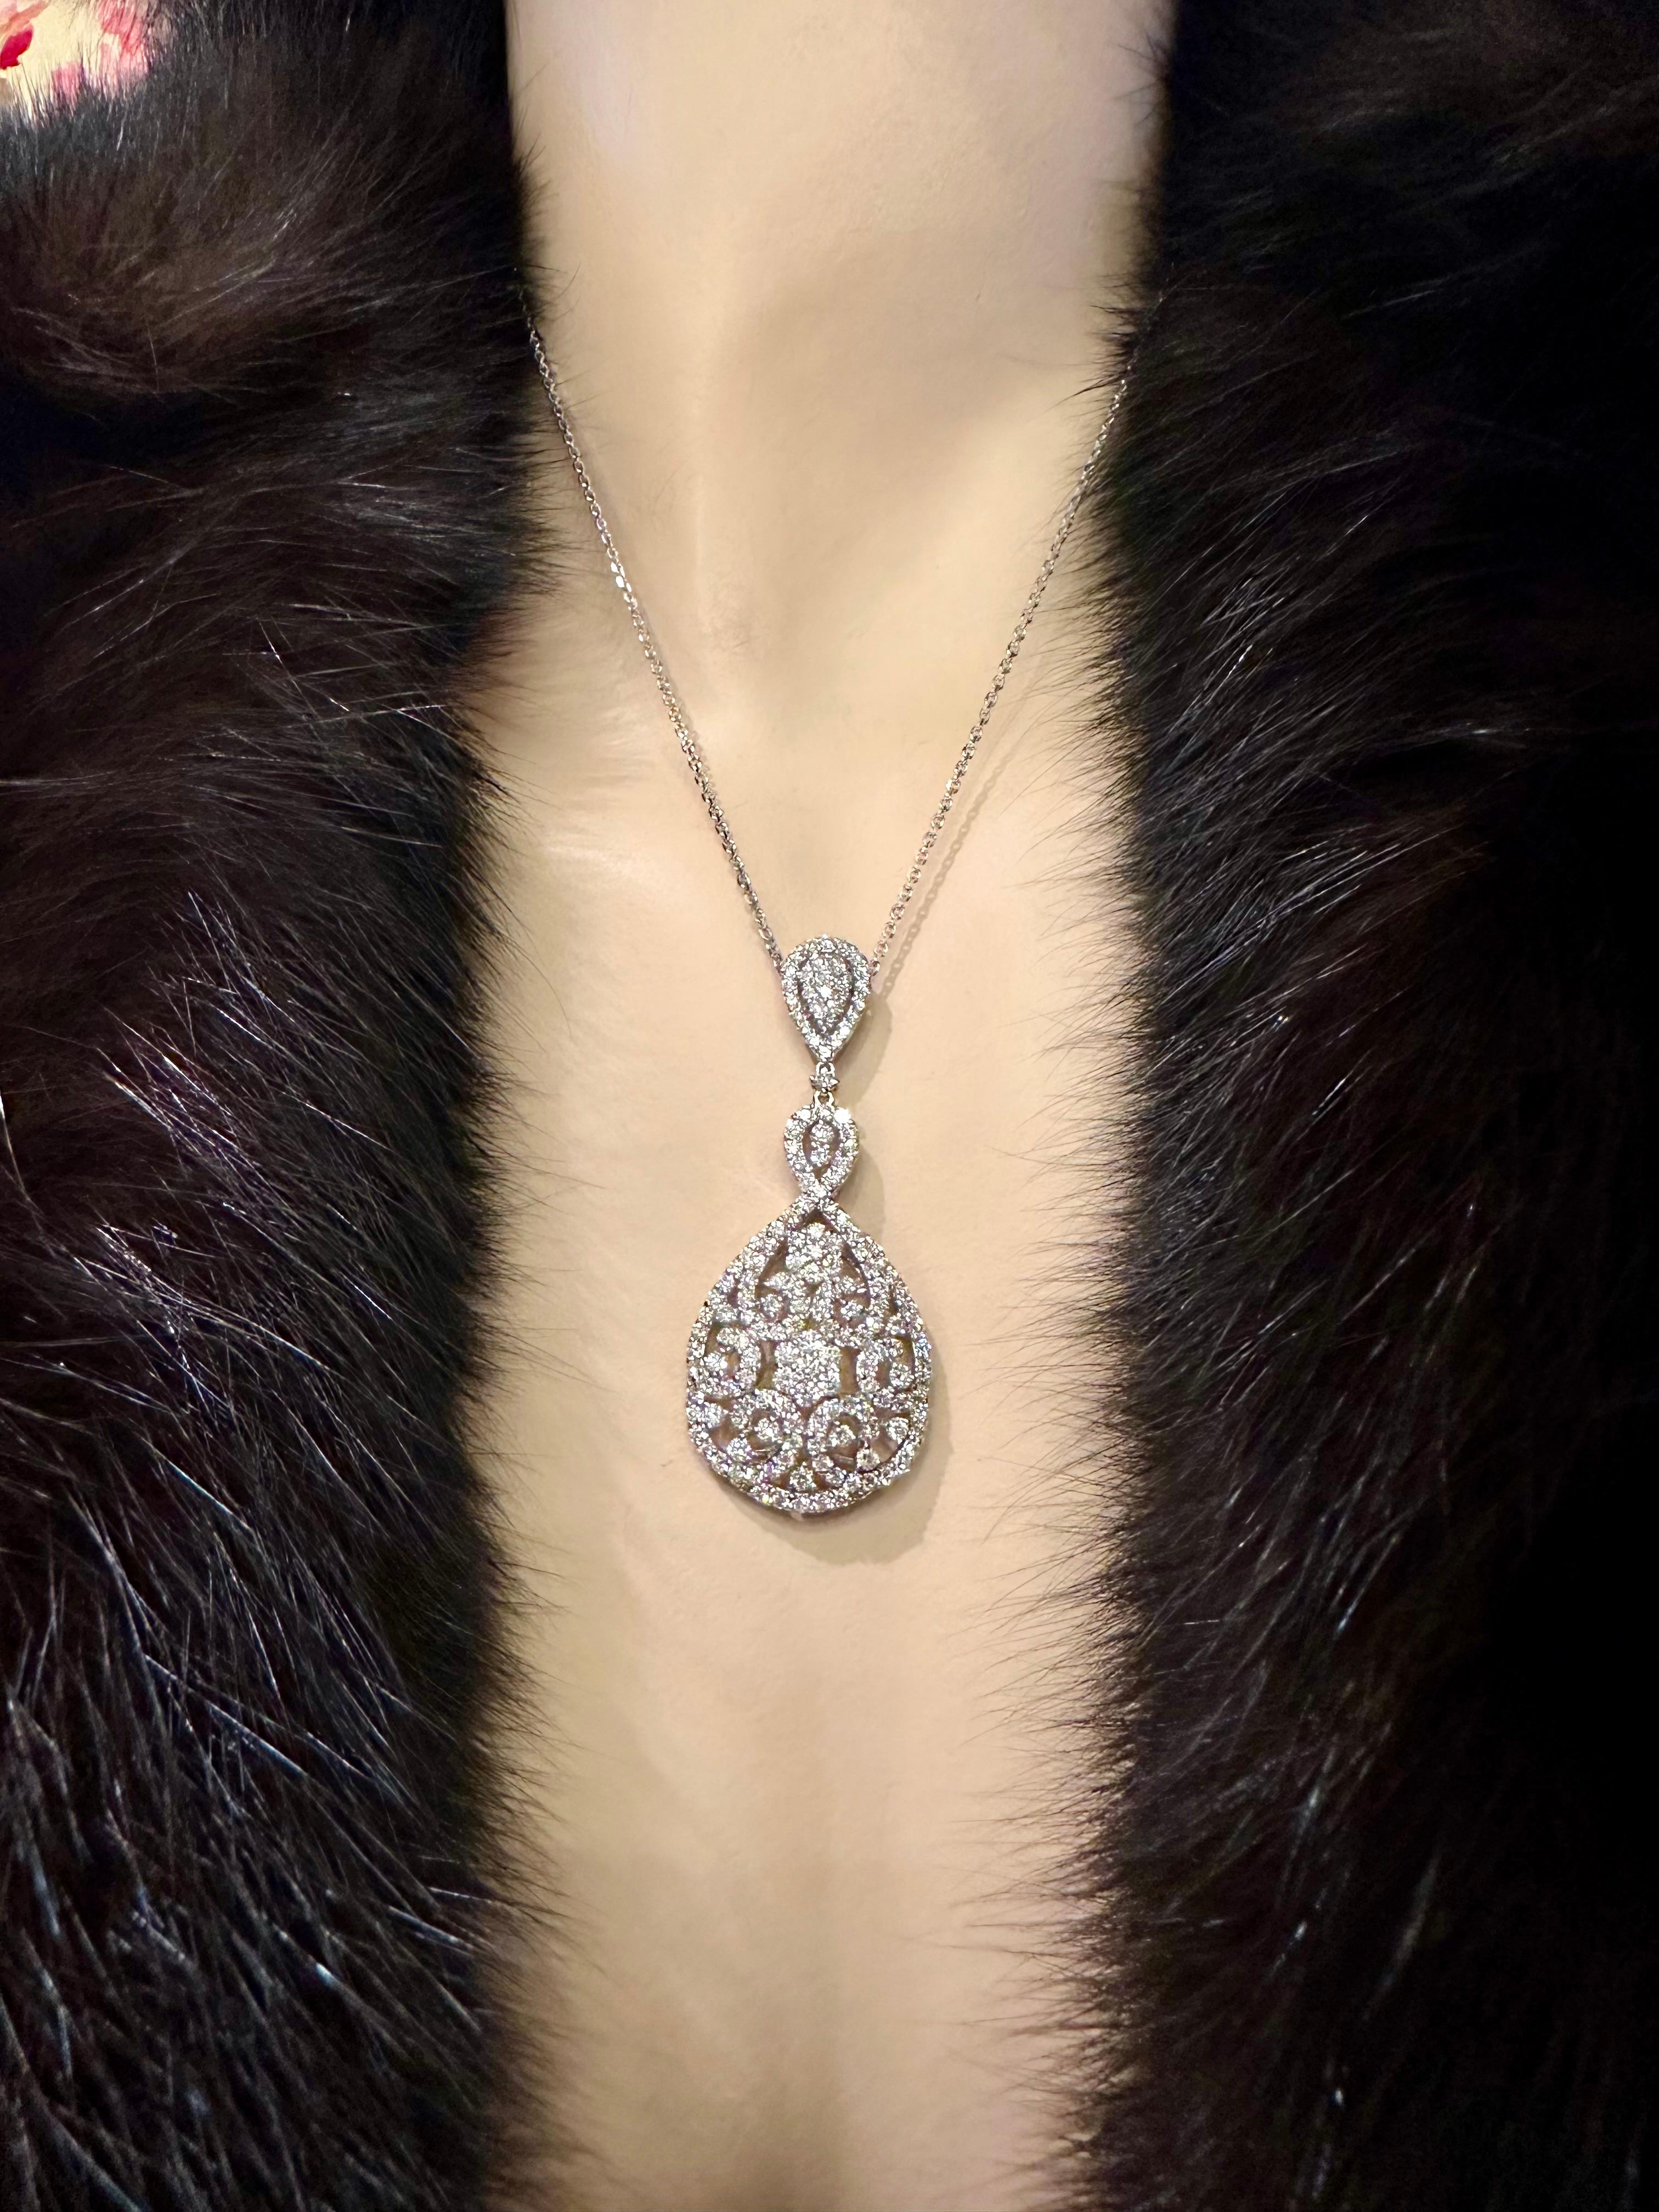 Artisan Magnificent 8.5 Carat Diamond 18K White Gold Pear Shaped Drop Pendant on Chain For Sale